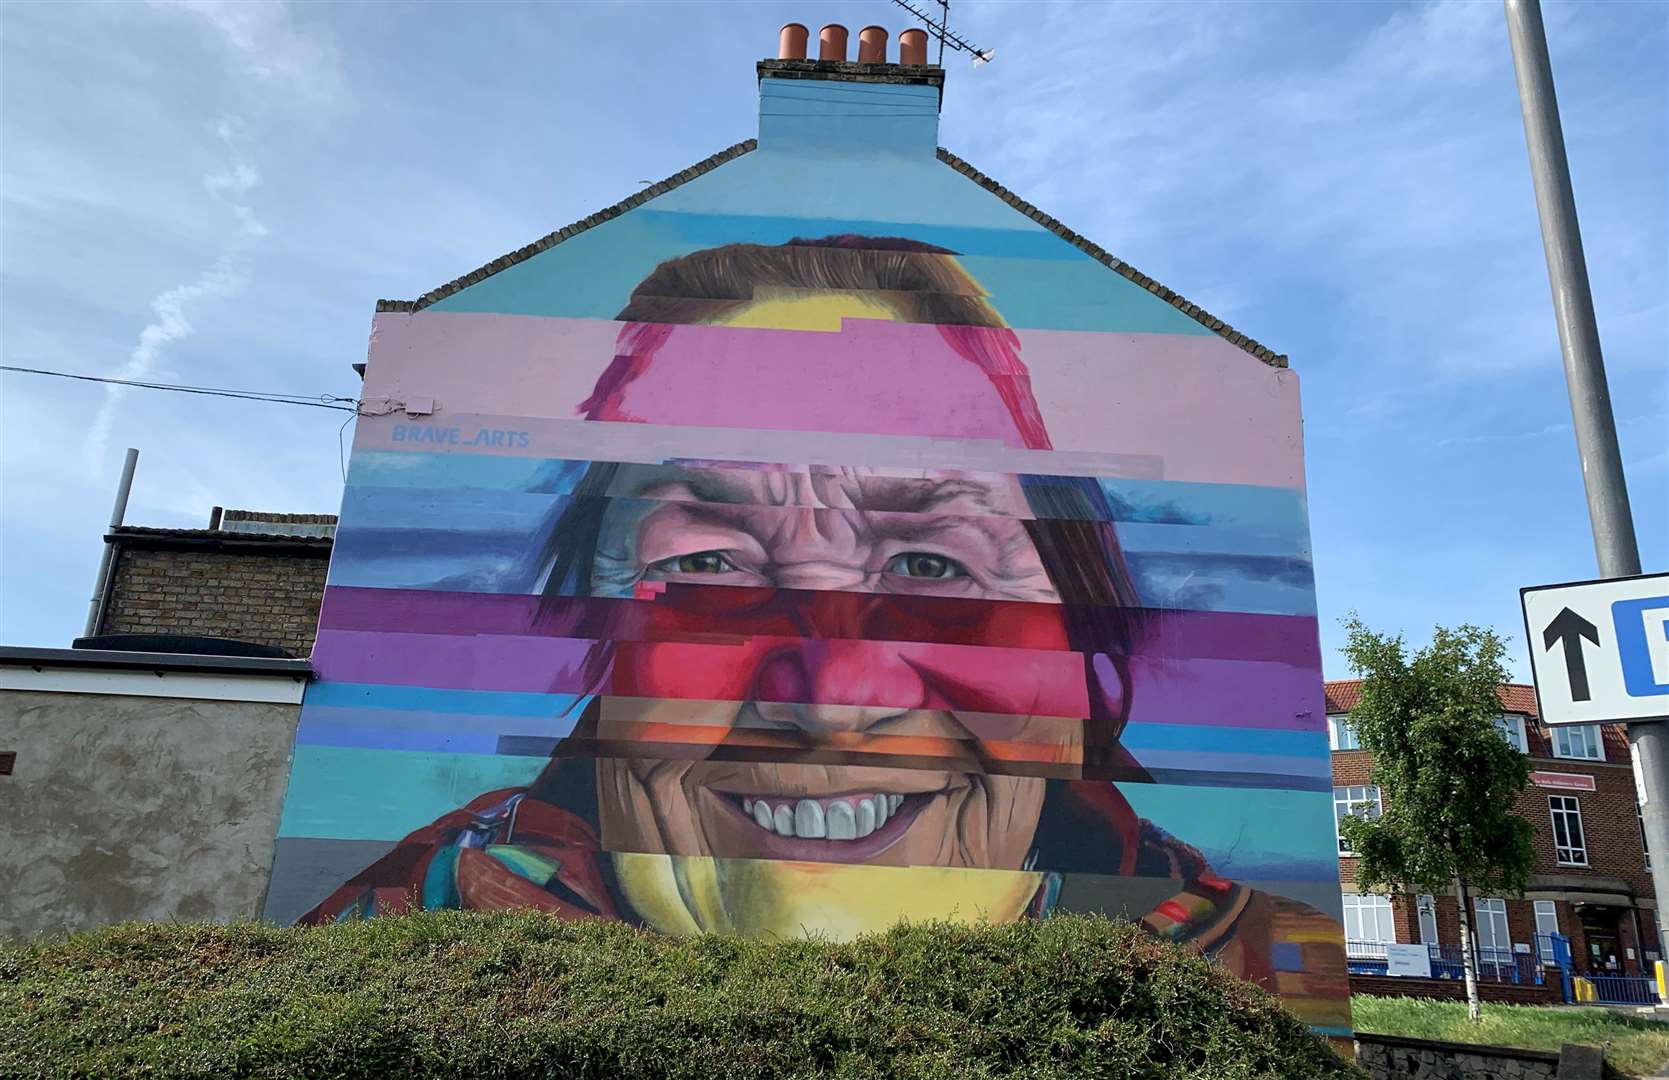 The mural at the end of Margate High Street is by artist Scotty Brave in his signature style